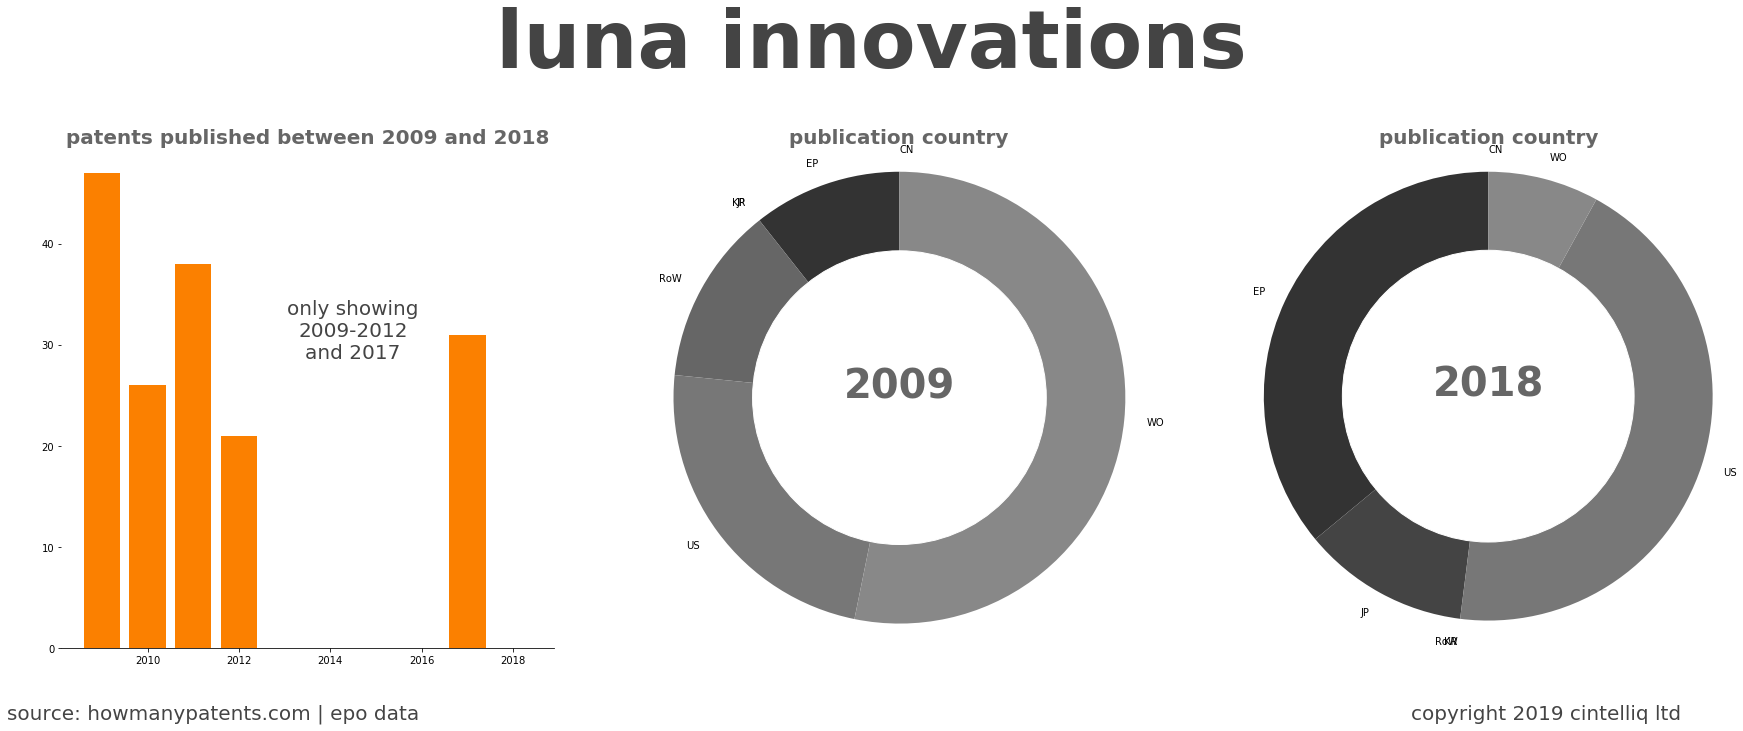 summary of patents for Luna Innovations